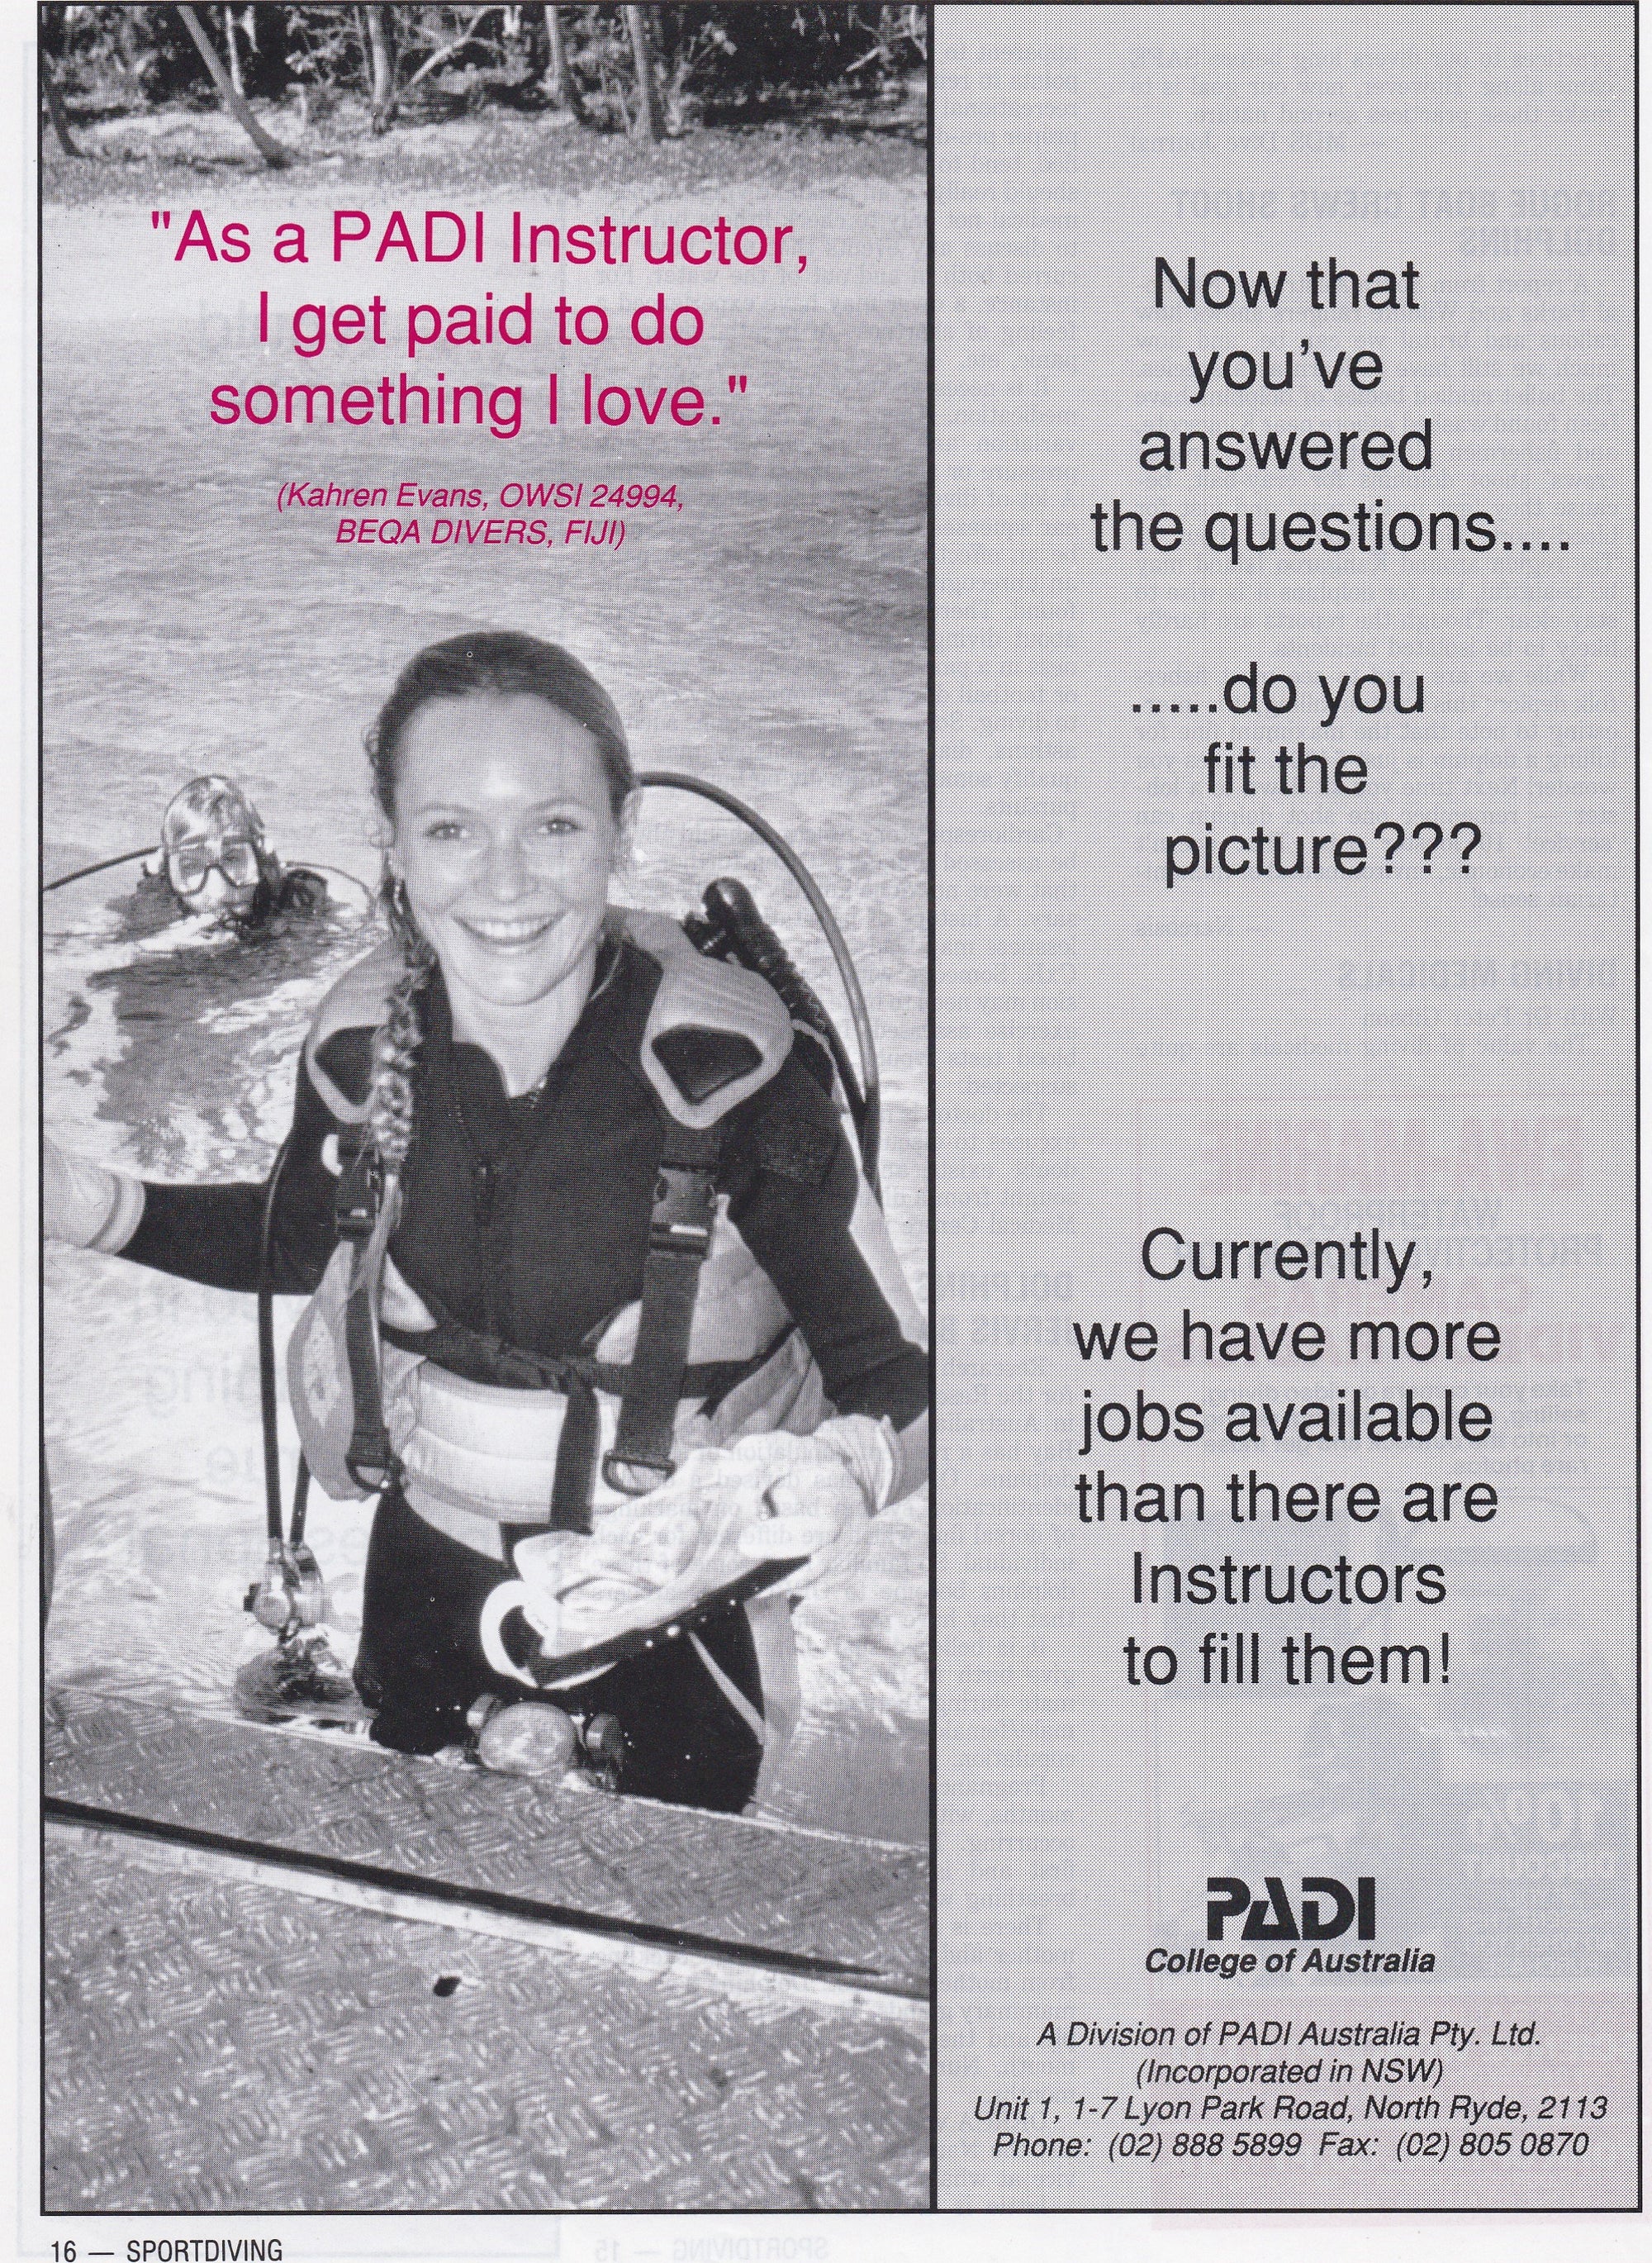 Benefits of becoming a PADI Open Water Scuba Instructor